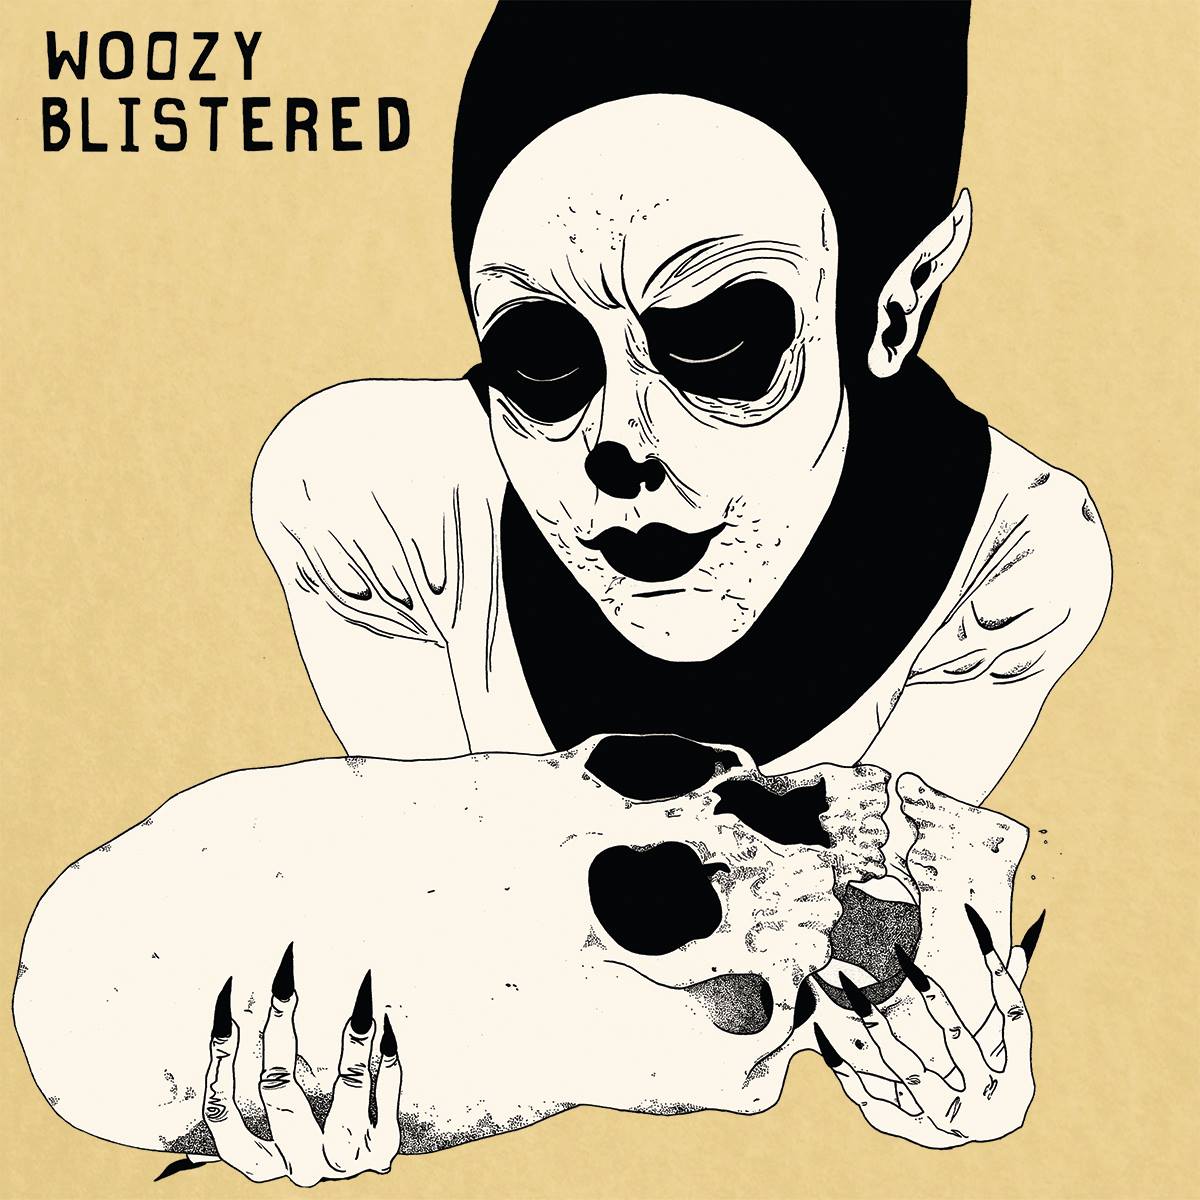 16. WOOZY | "BLISTERED"